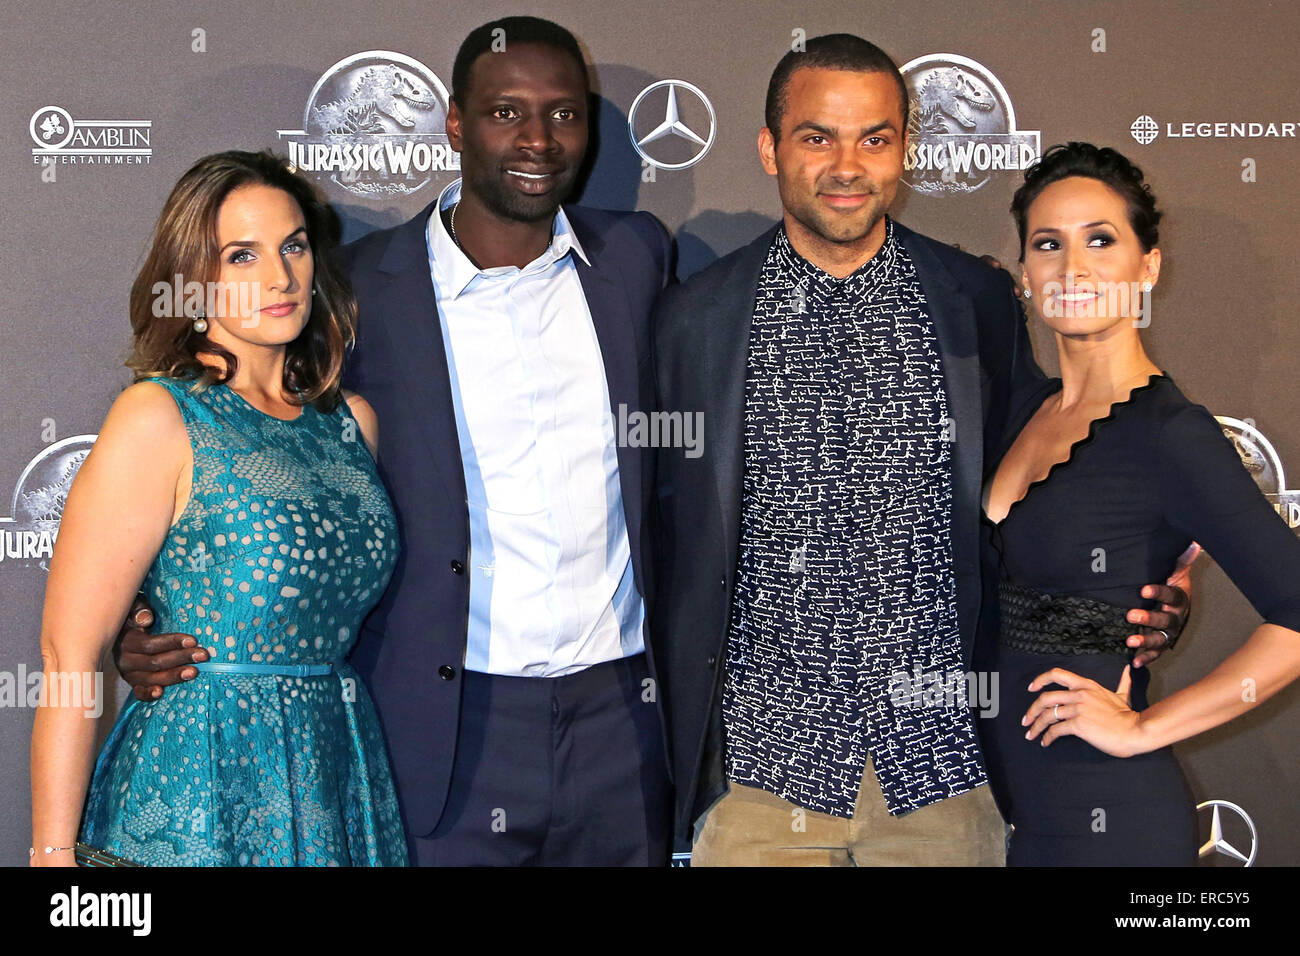 French actor Omar Sy together with his wife Helene Sy and Tony Parker with his wife Axelle Francine attend the premiere of the movie 'Jurassic World' at the UGC Normandie in Paris. On 29 of May, 2015./picture alliance Stock Photo